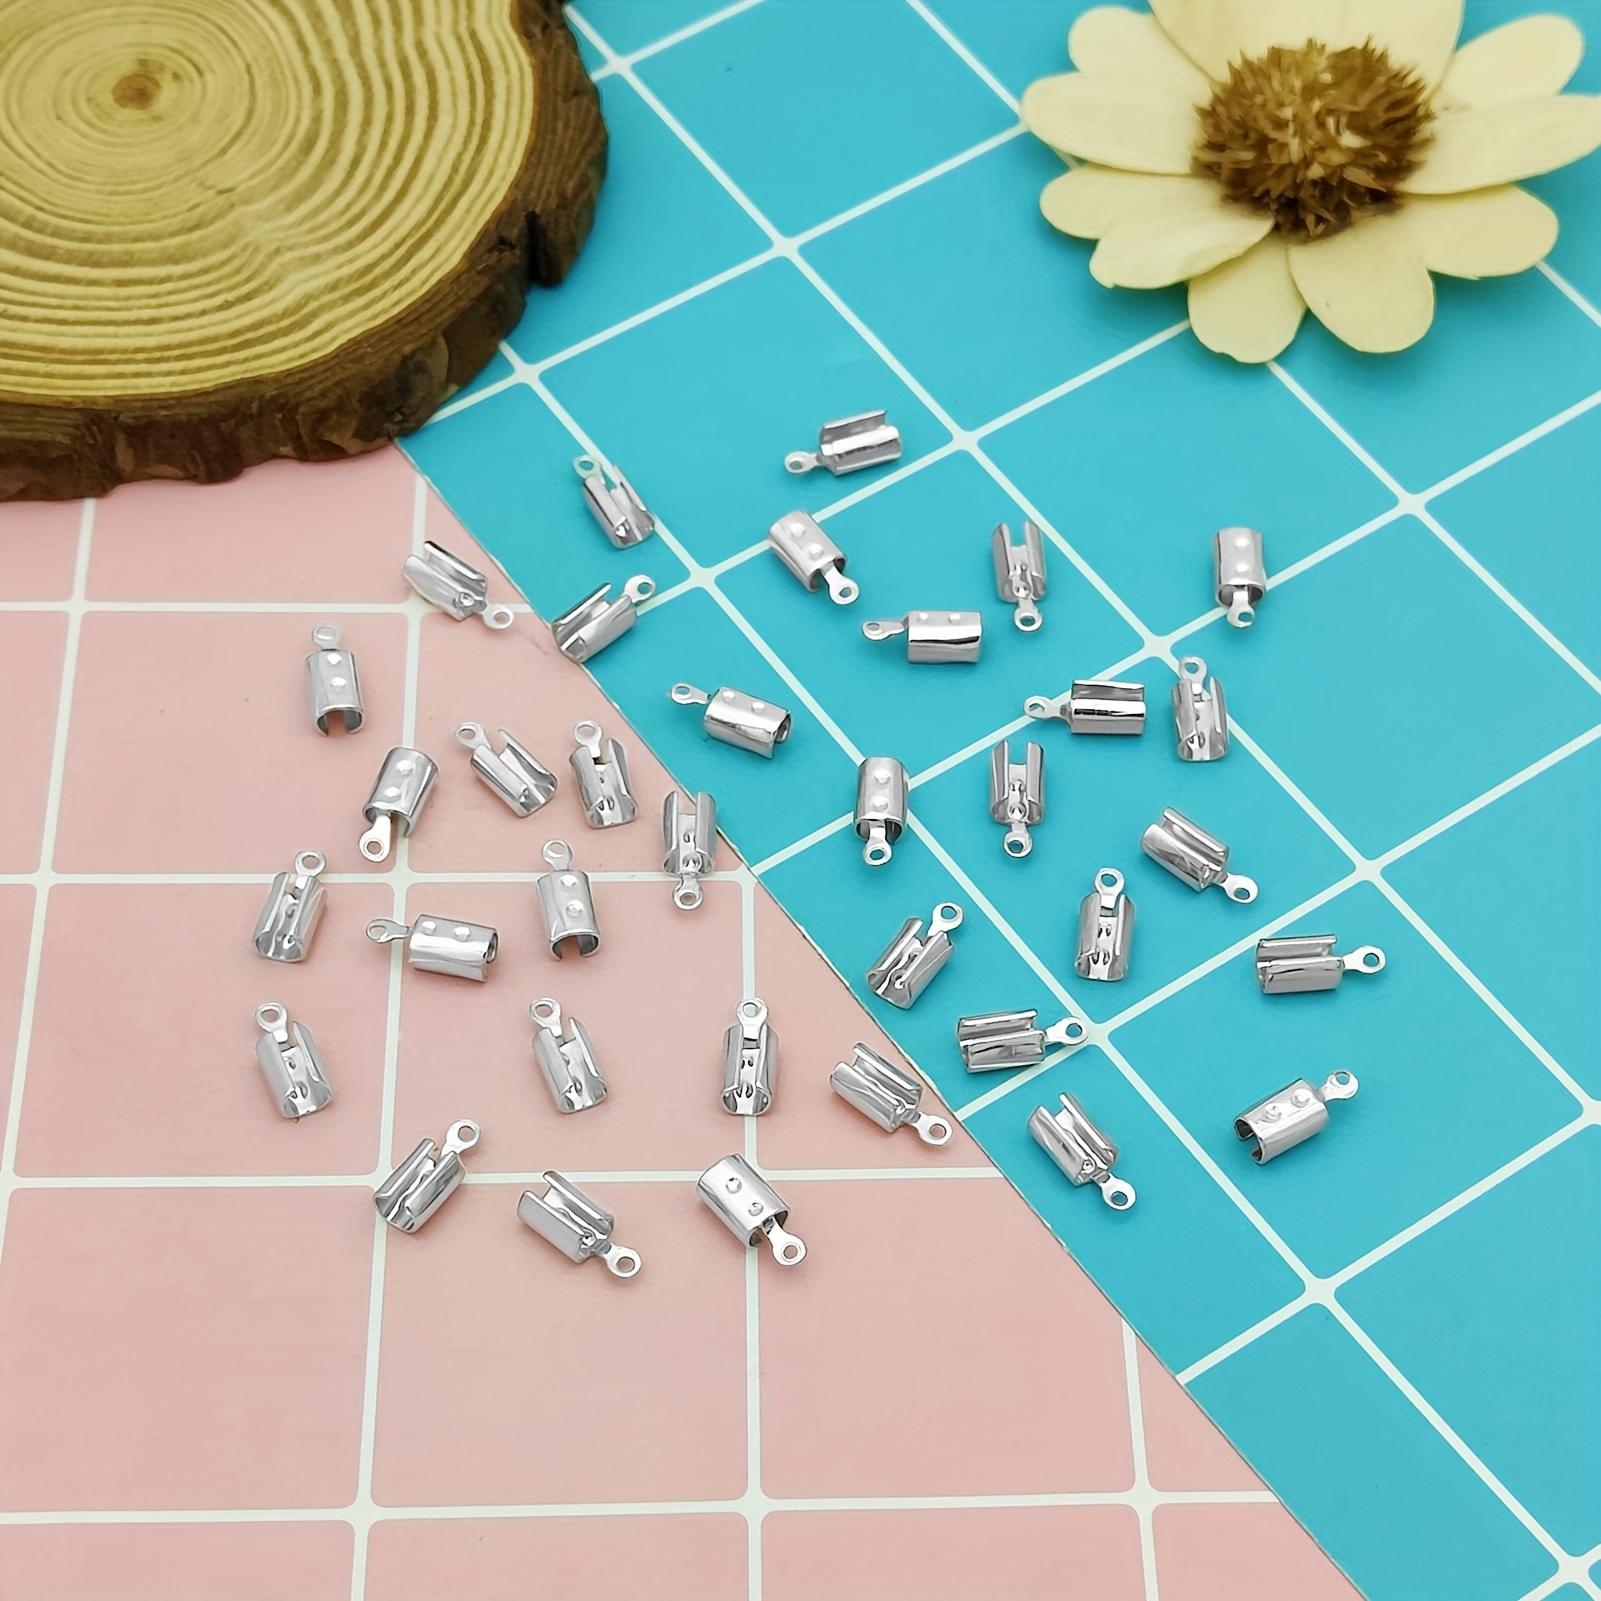 Mandala Crafts Fold Over Crimp Cord Ends for Jewelry Making – Cord End  Clamps - Cord Clamp Ends Crimp Jewelry Finding for Leather Ribbon 1600 PCs  5